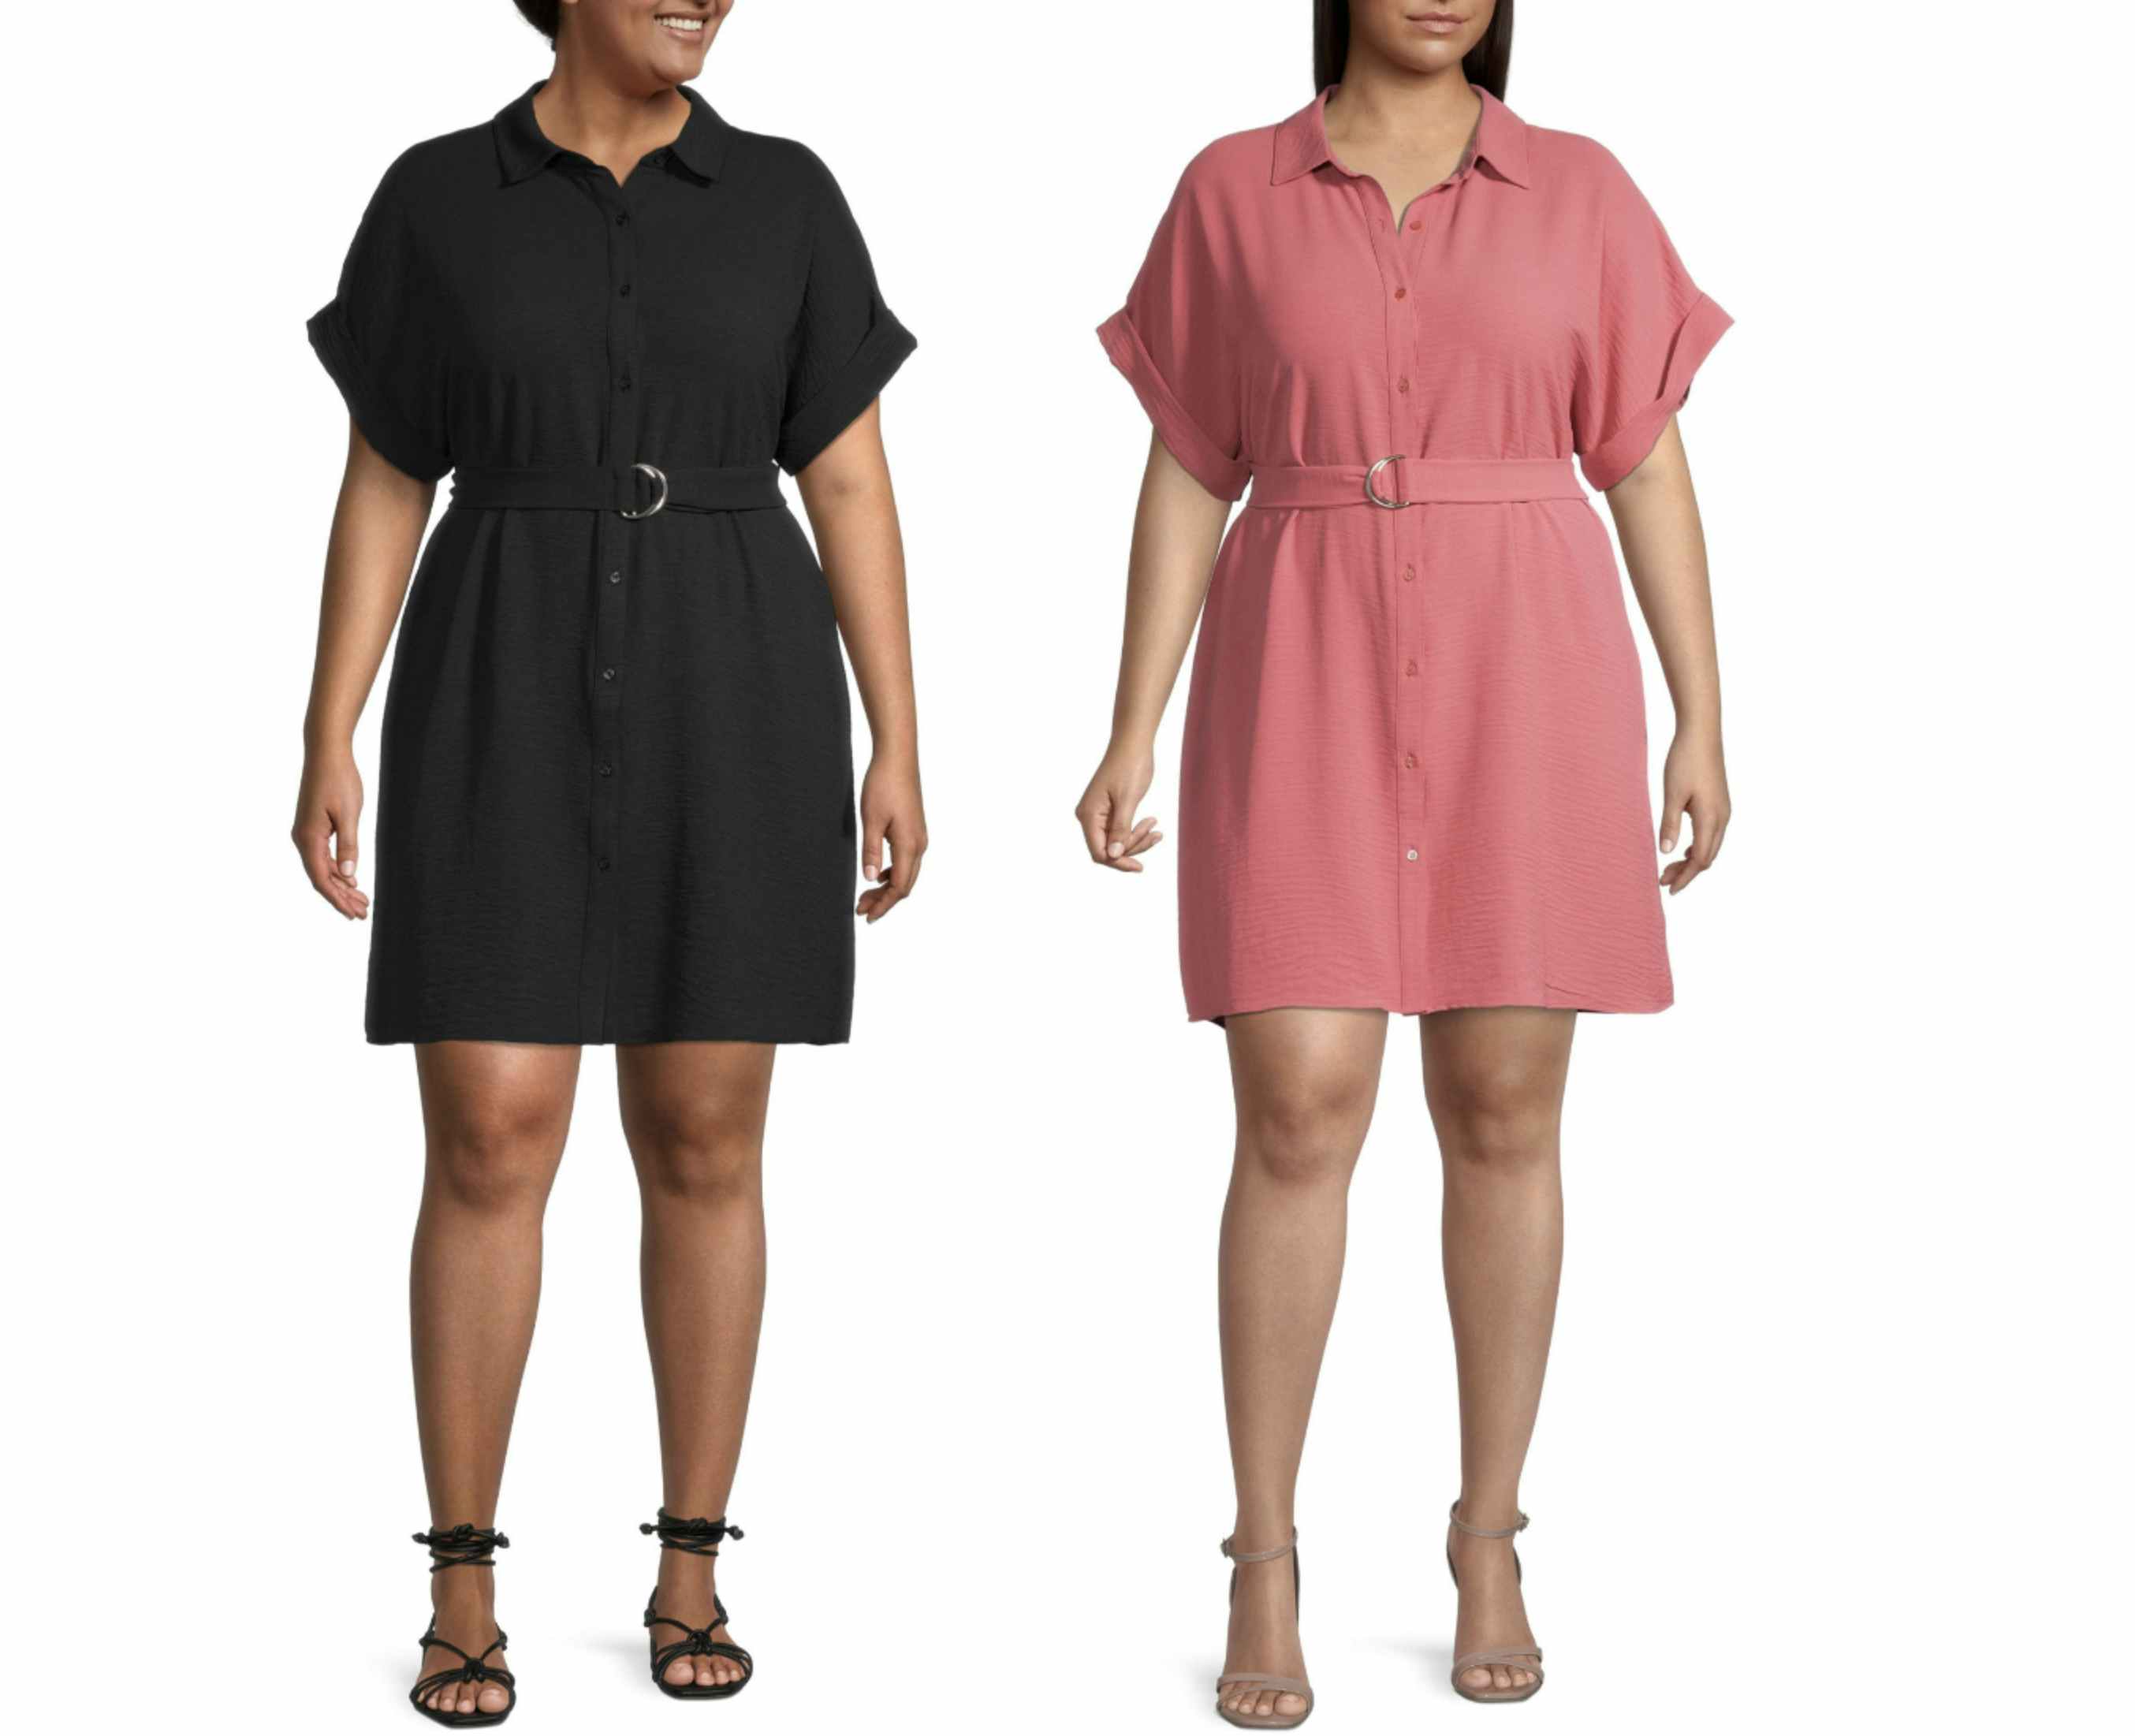 A JCPenney model wearing a Worthington Plus Short Sleeve Shift Dress on a white background.